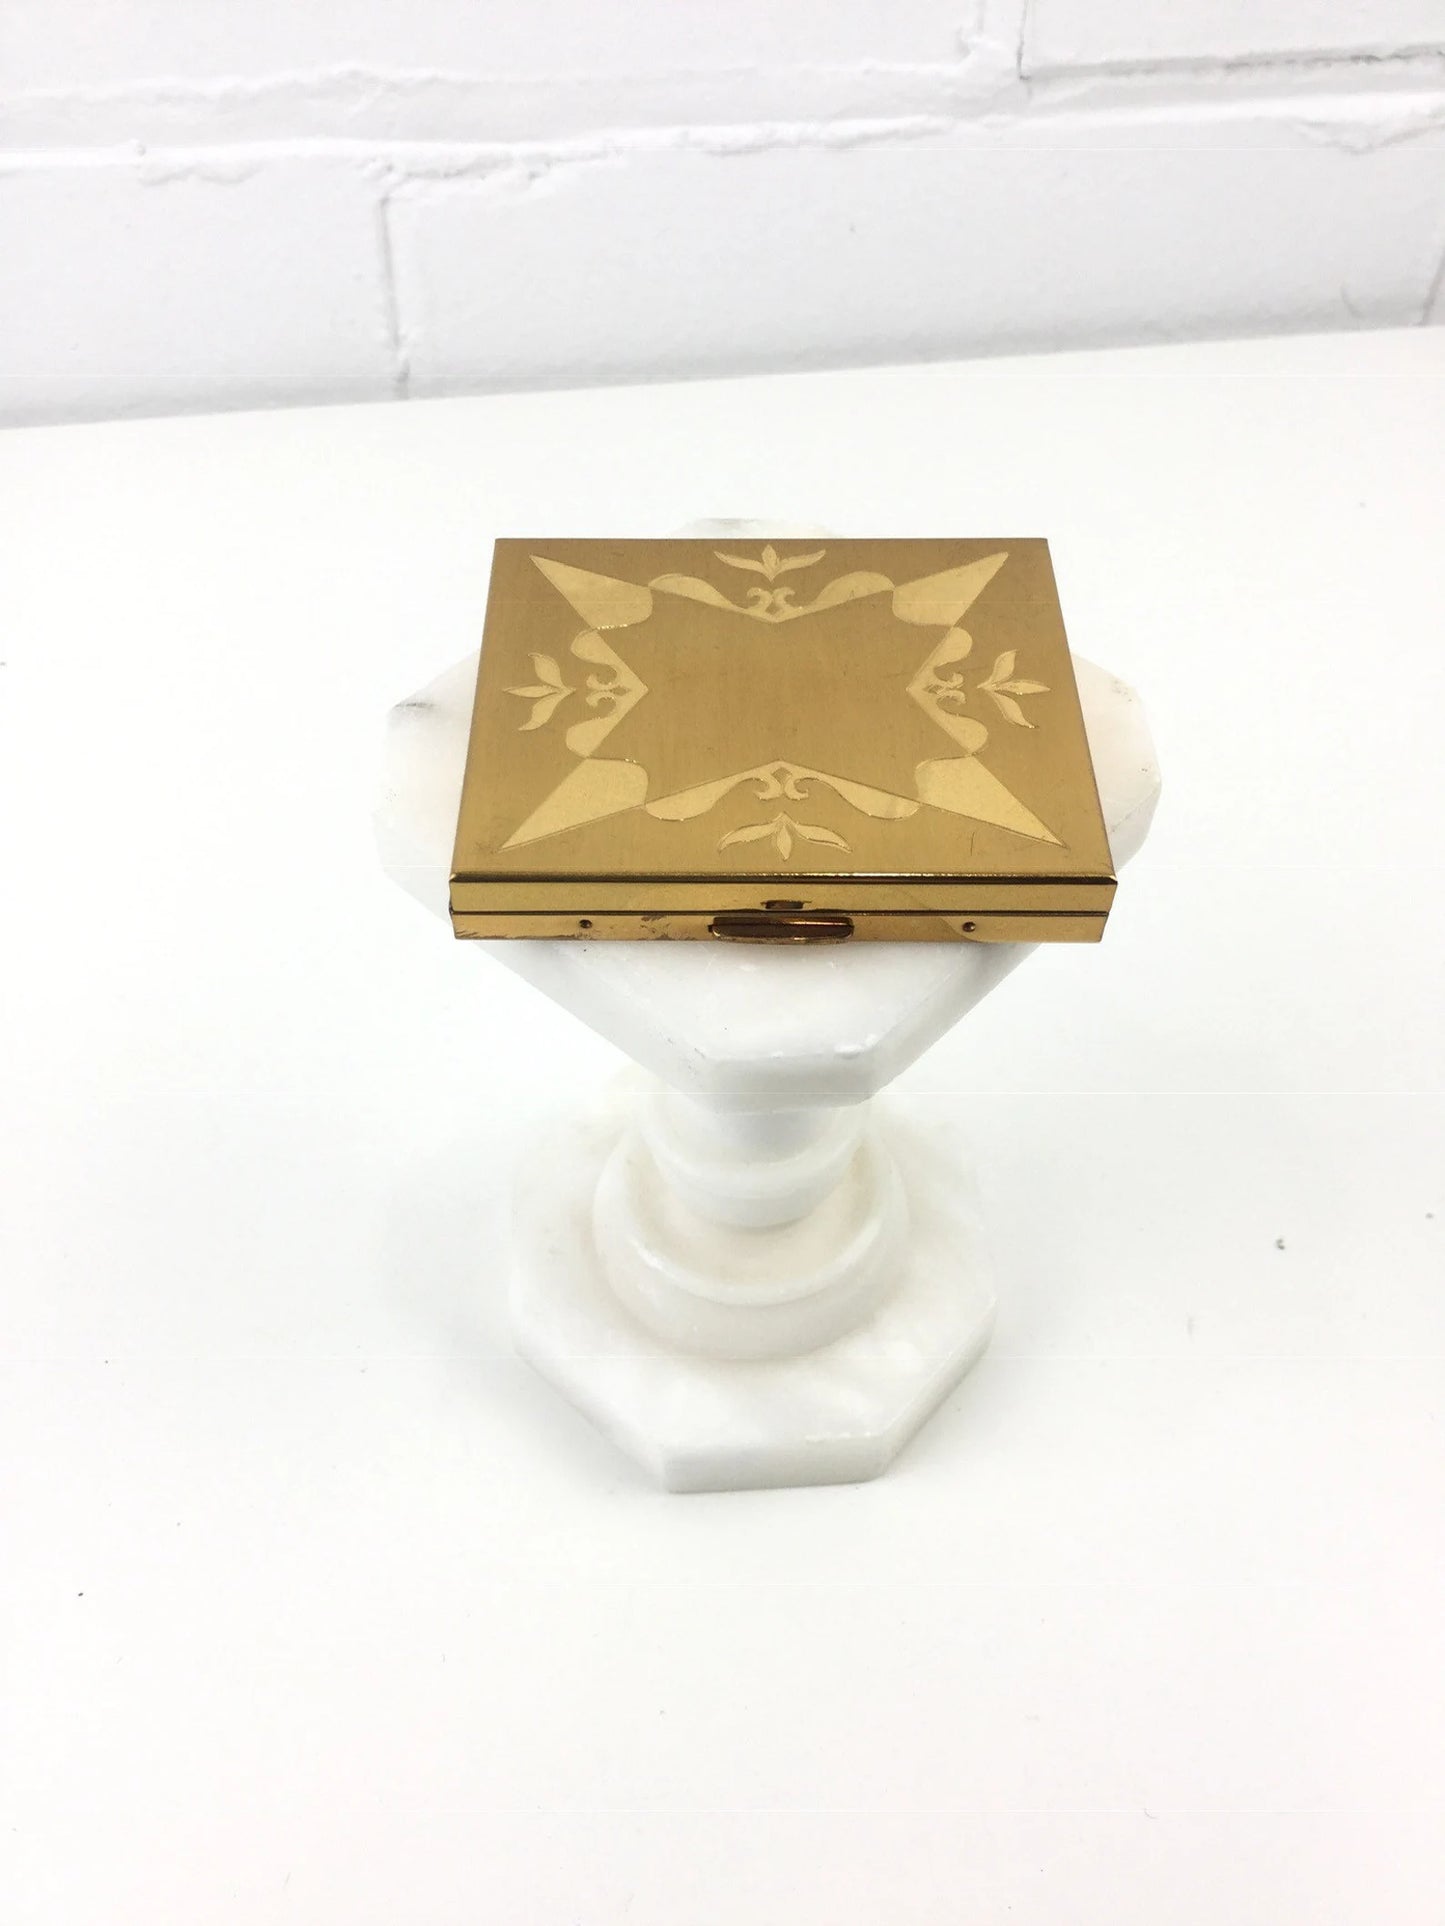 1960s Powder Compact by Dexter with Mirror and Powder Puff, Gold Metal Case